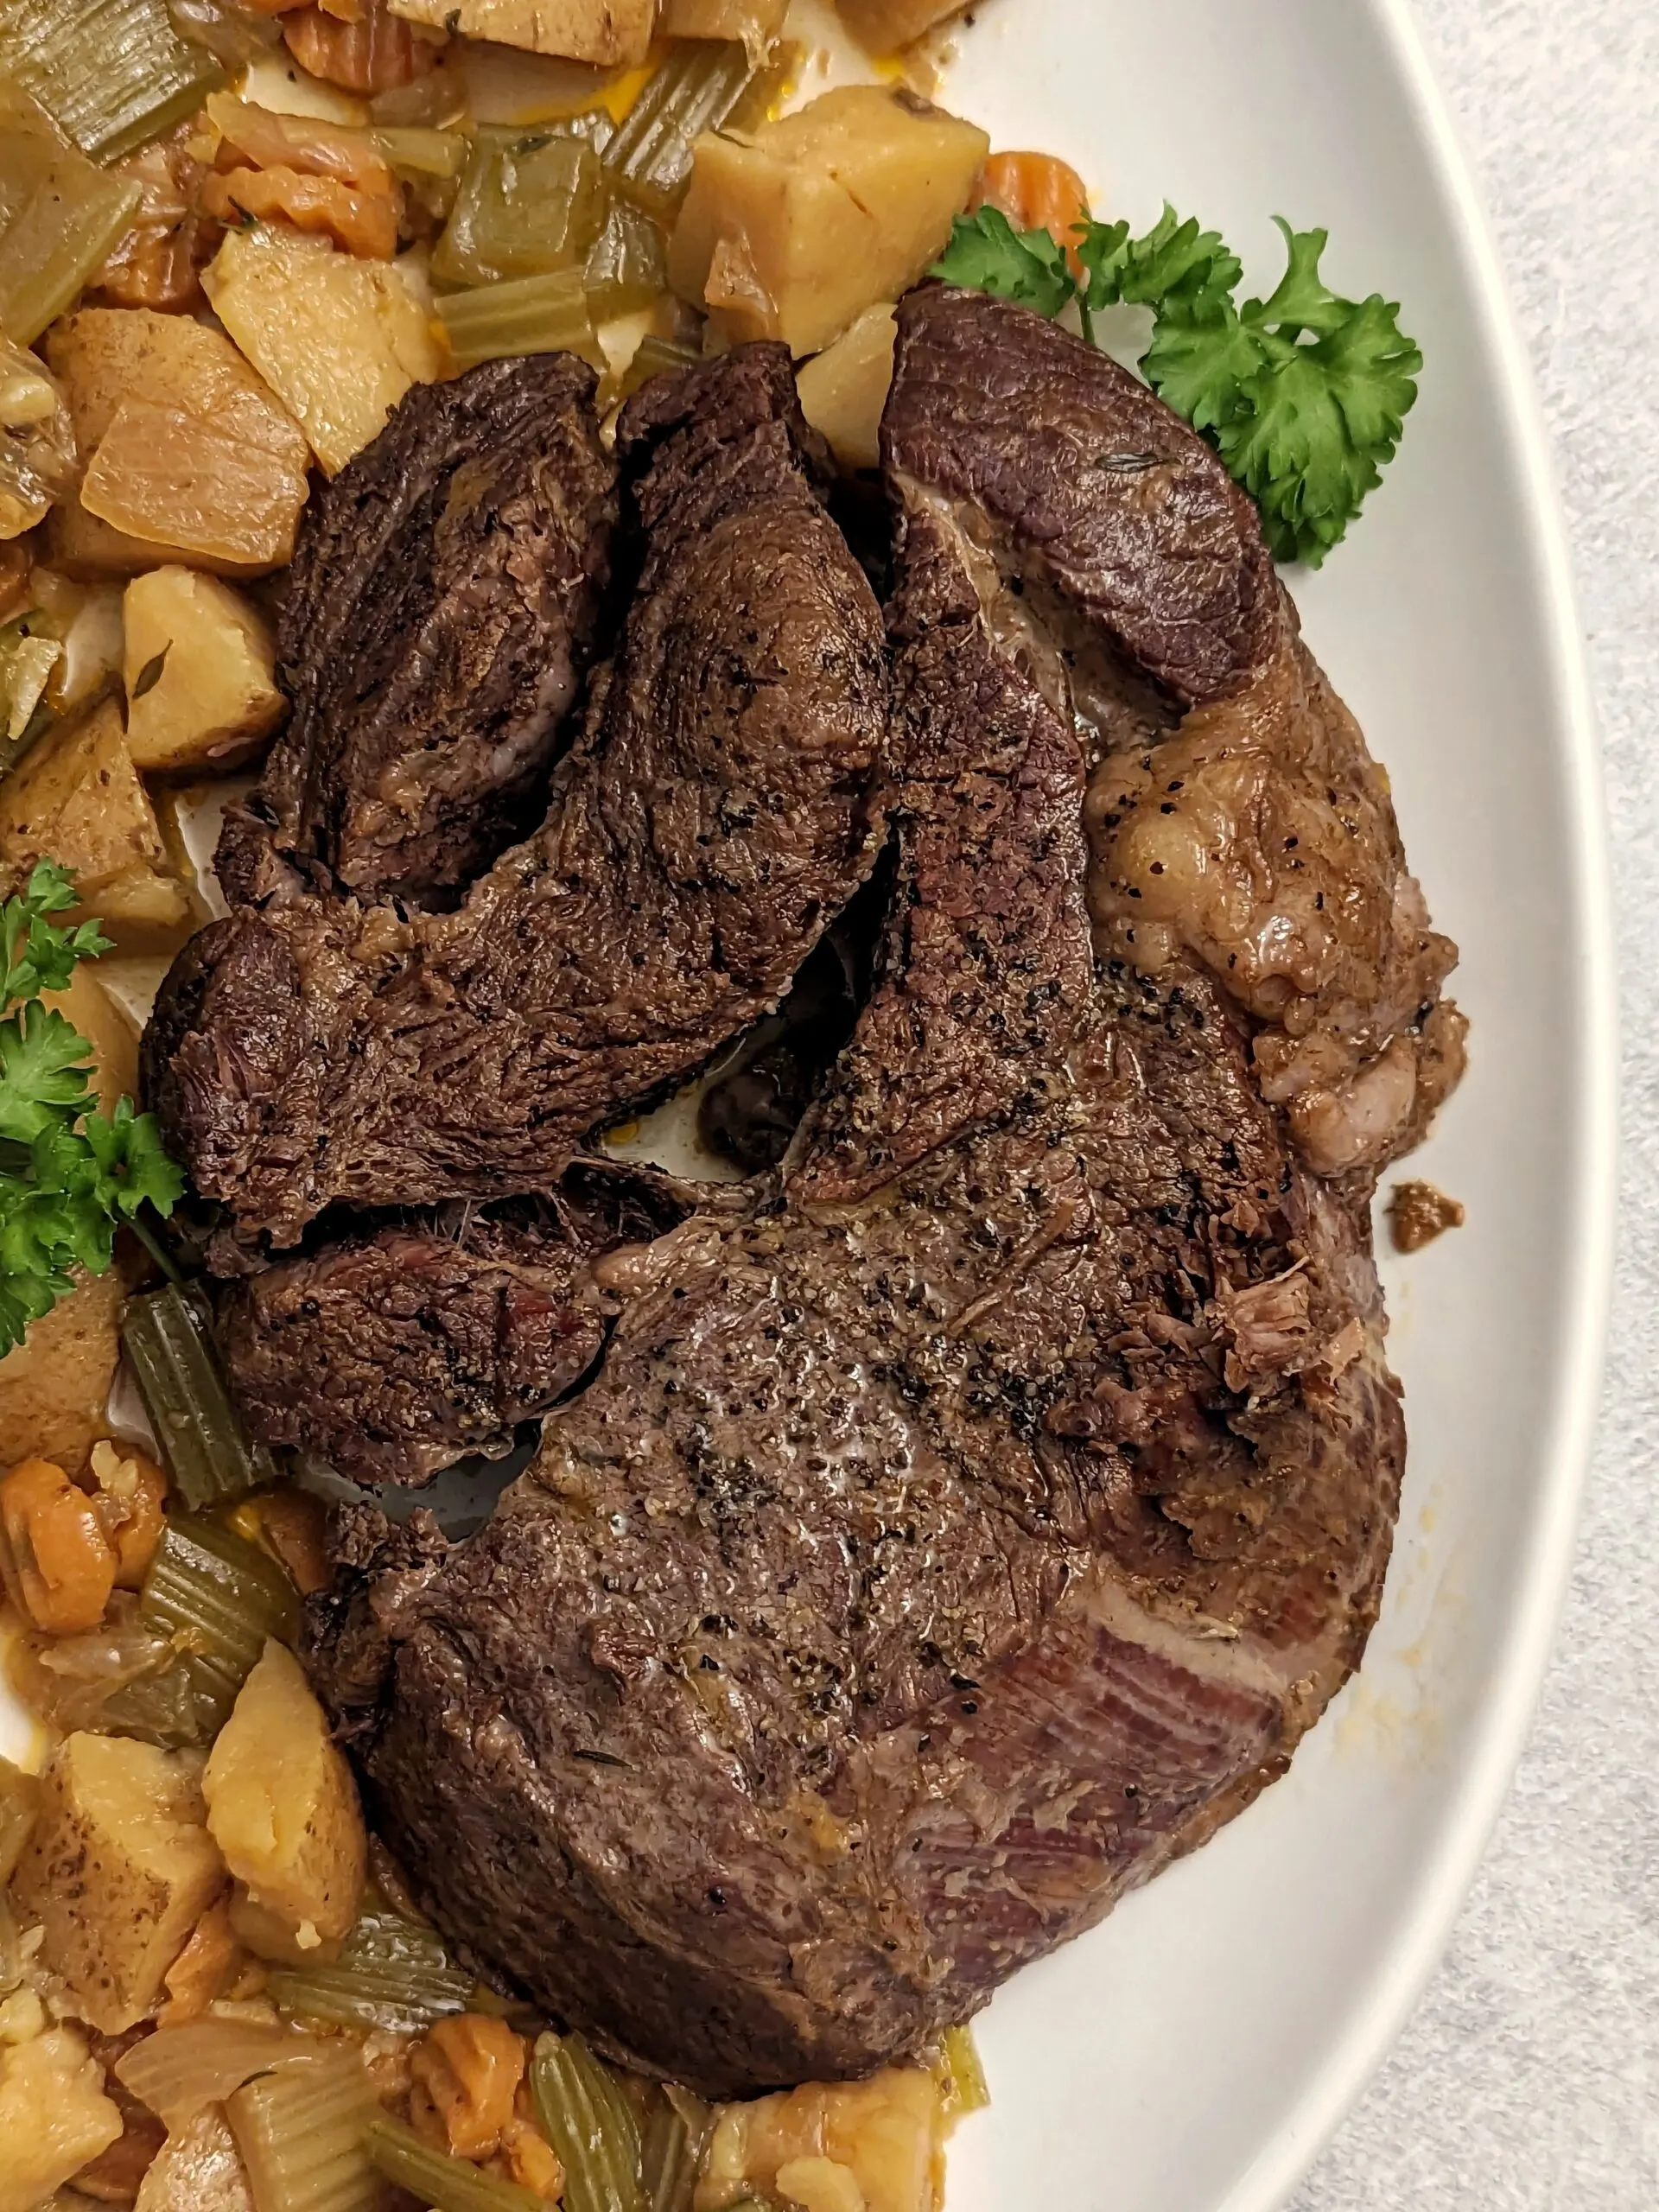 A whole pot roast surrounded by tender vegetables.